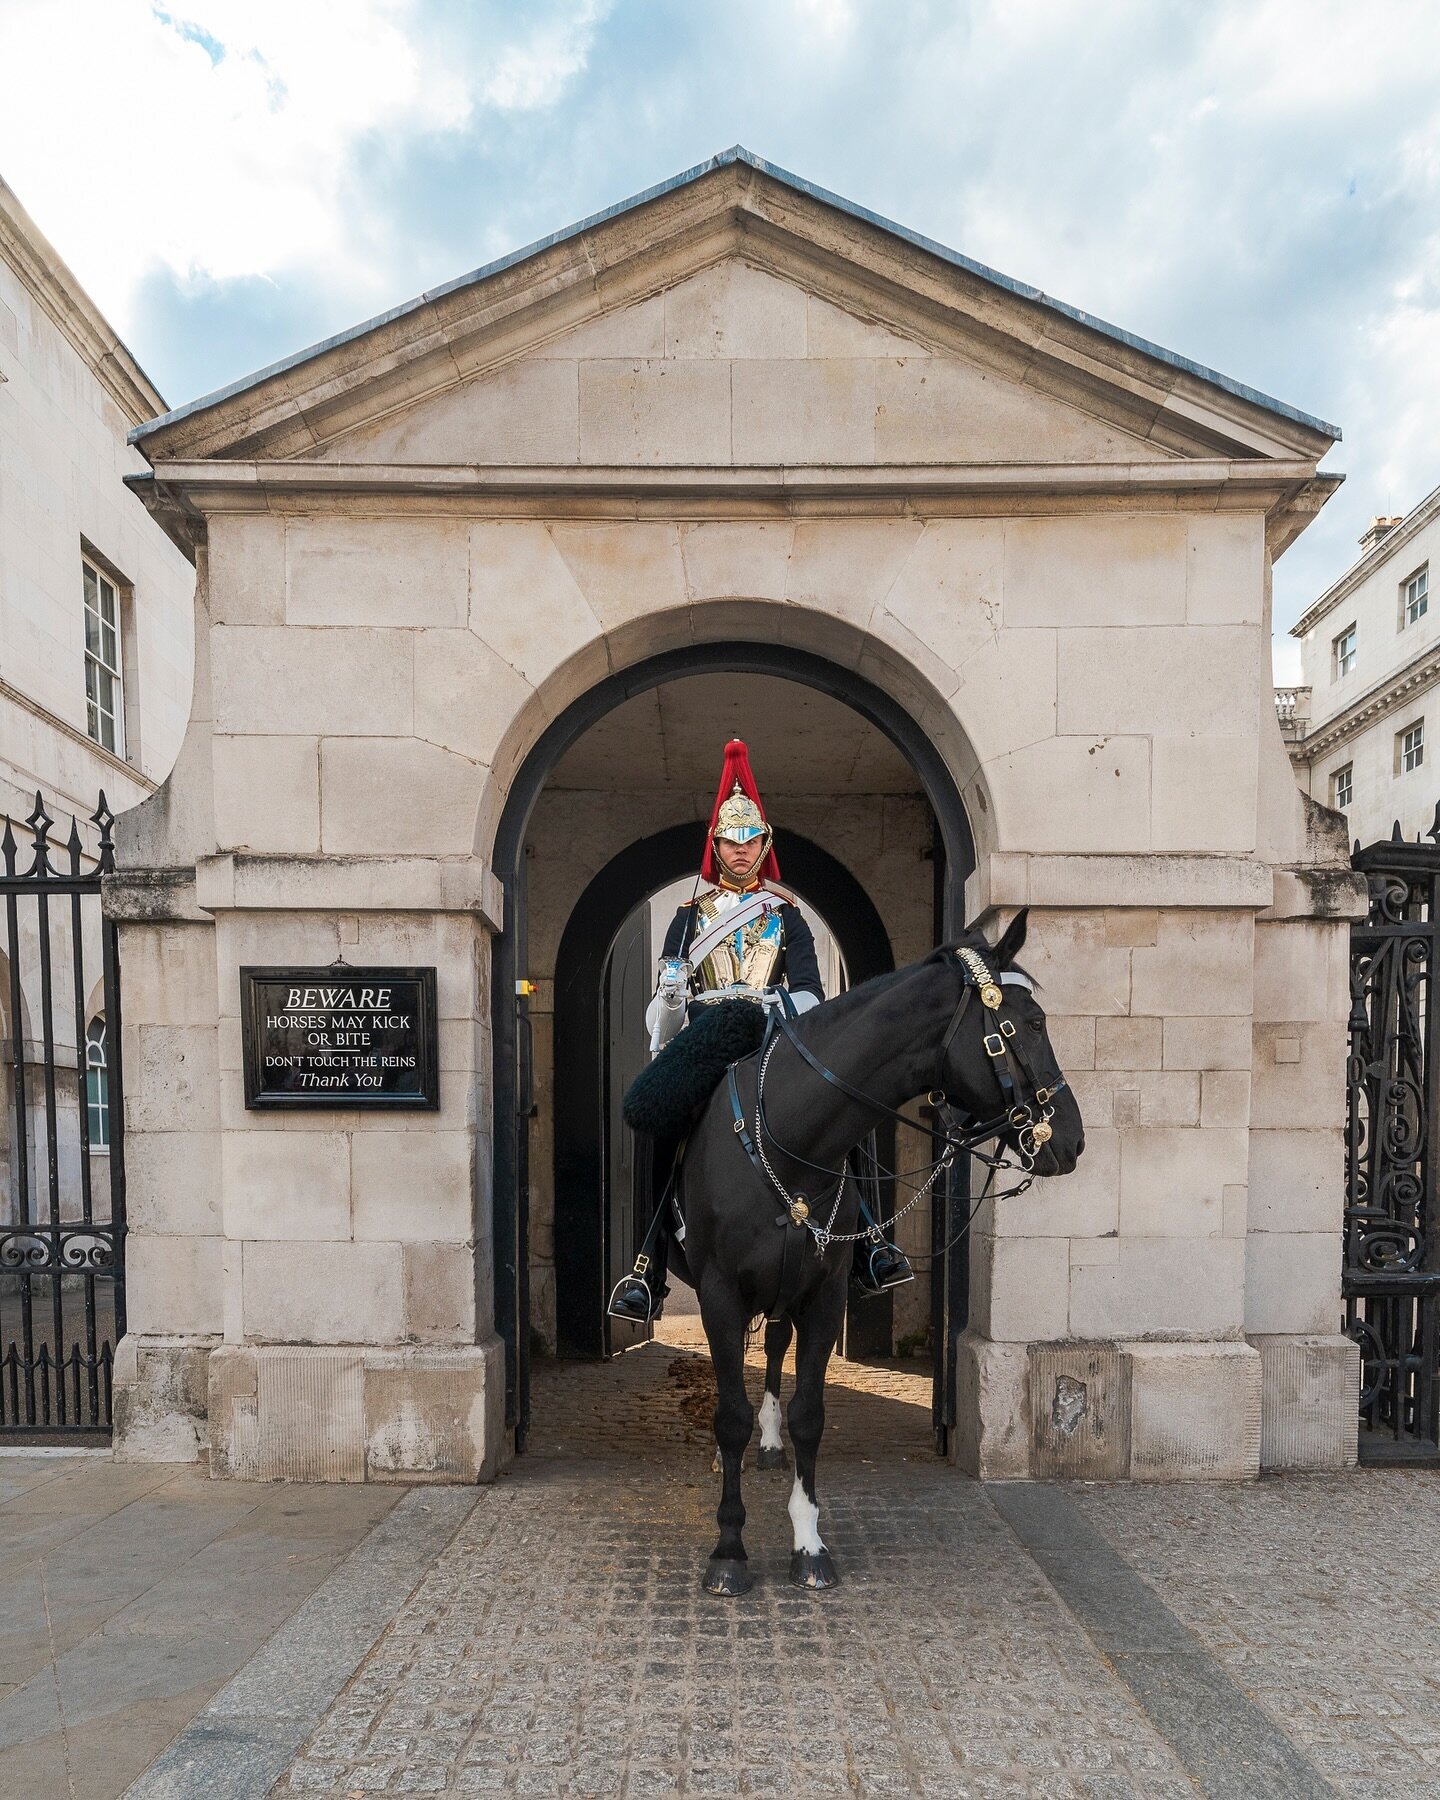 Stop horsing around it&rsquo;s almost a new year. 😂

One of my favorite snaps from London was this take from Horseguards Parade on Whitehall St. where people watch the changing of the guard. I wanted a framing shot with no people in it so it took a 